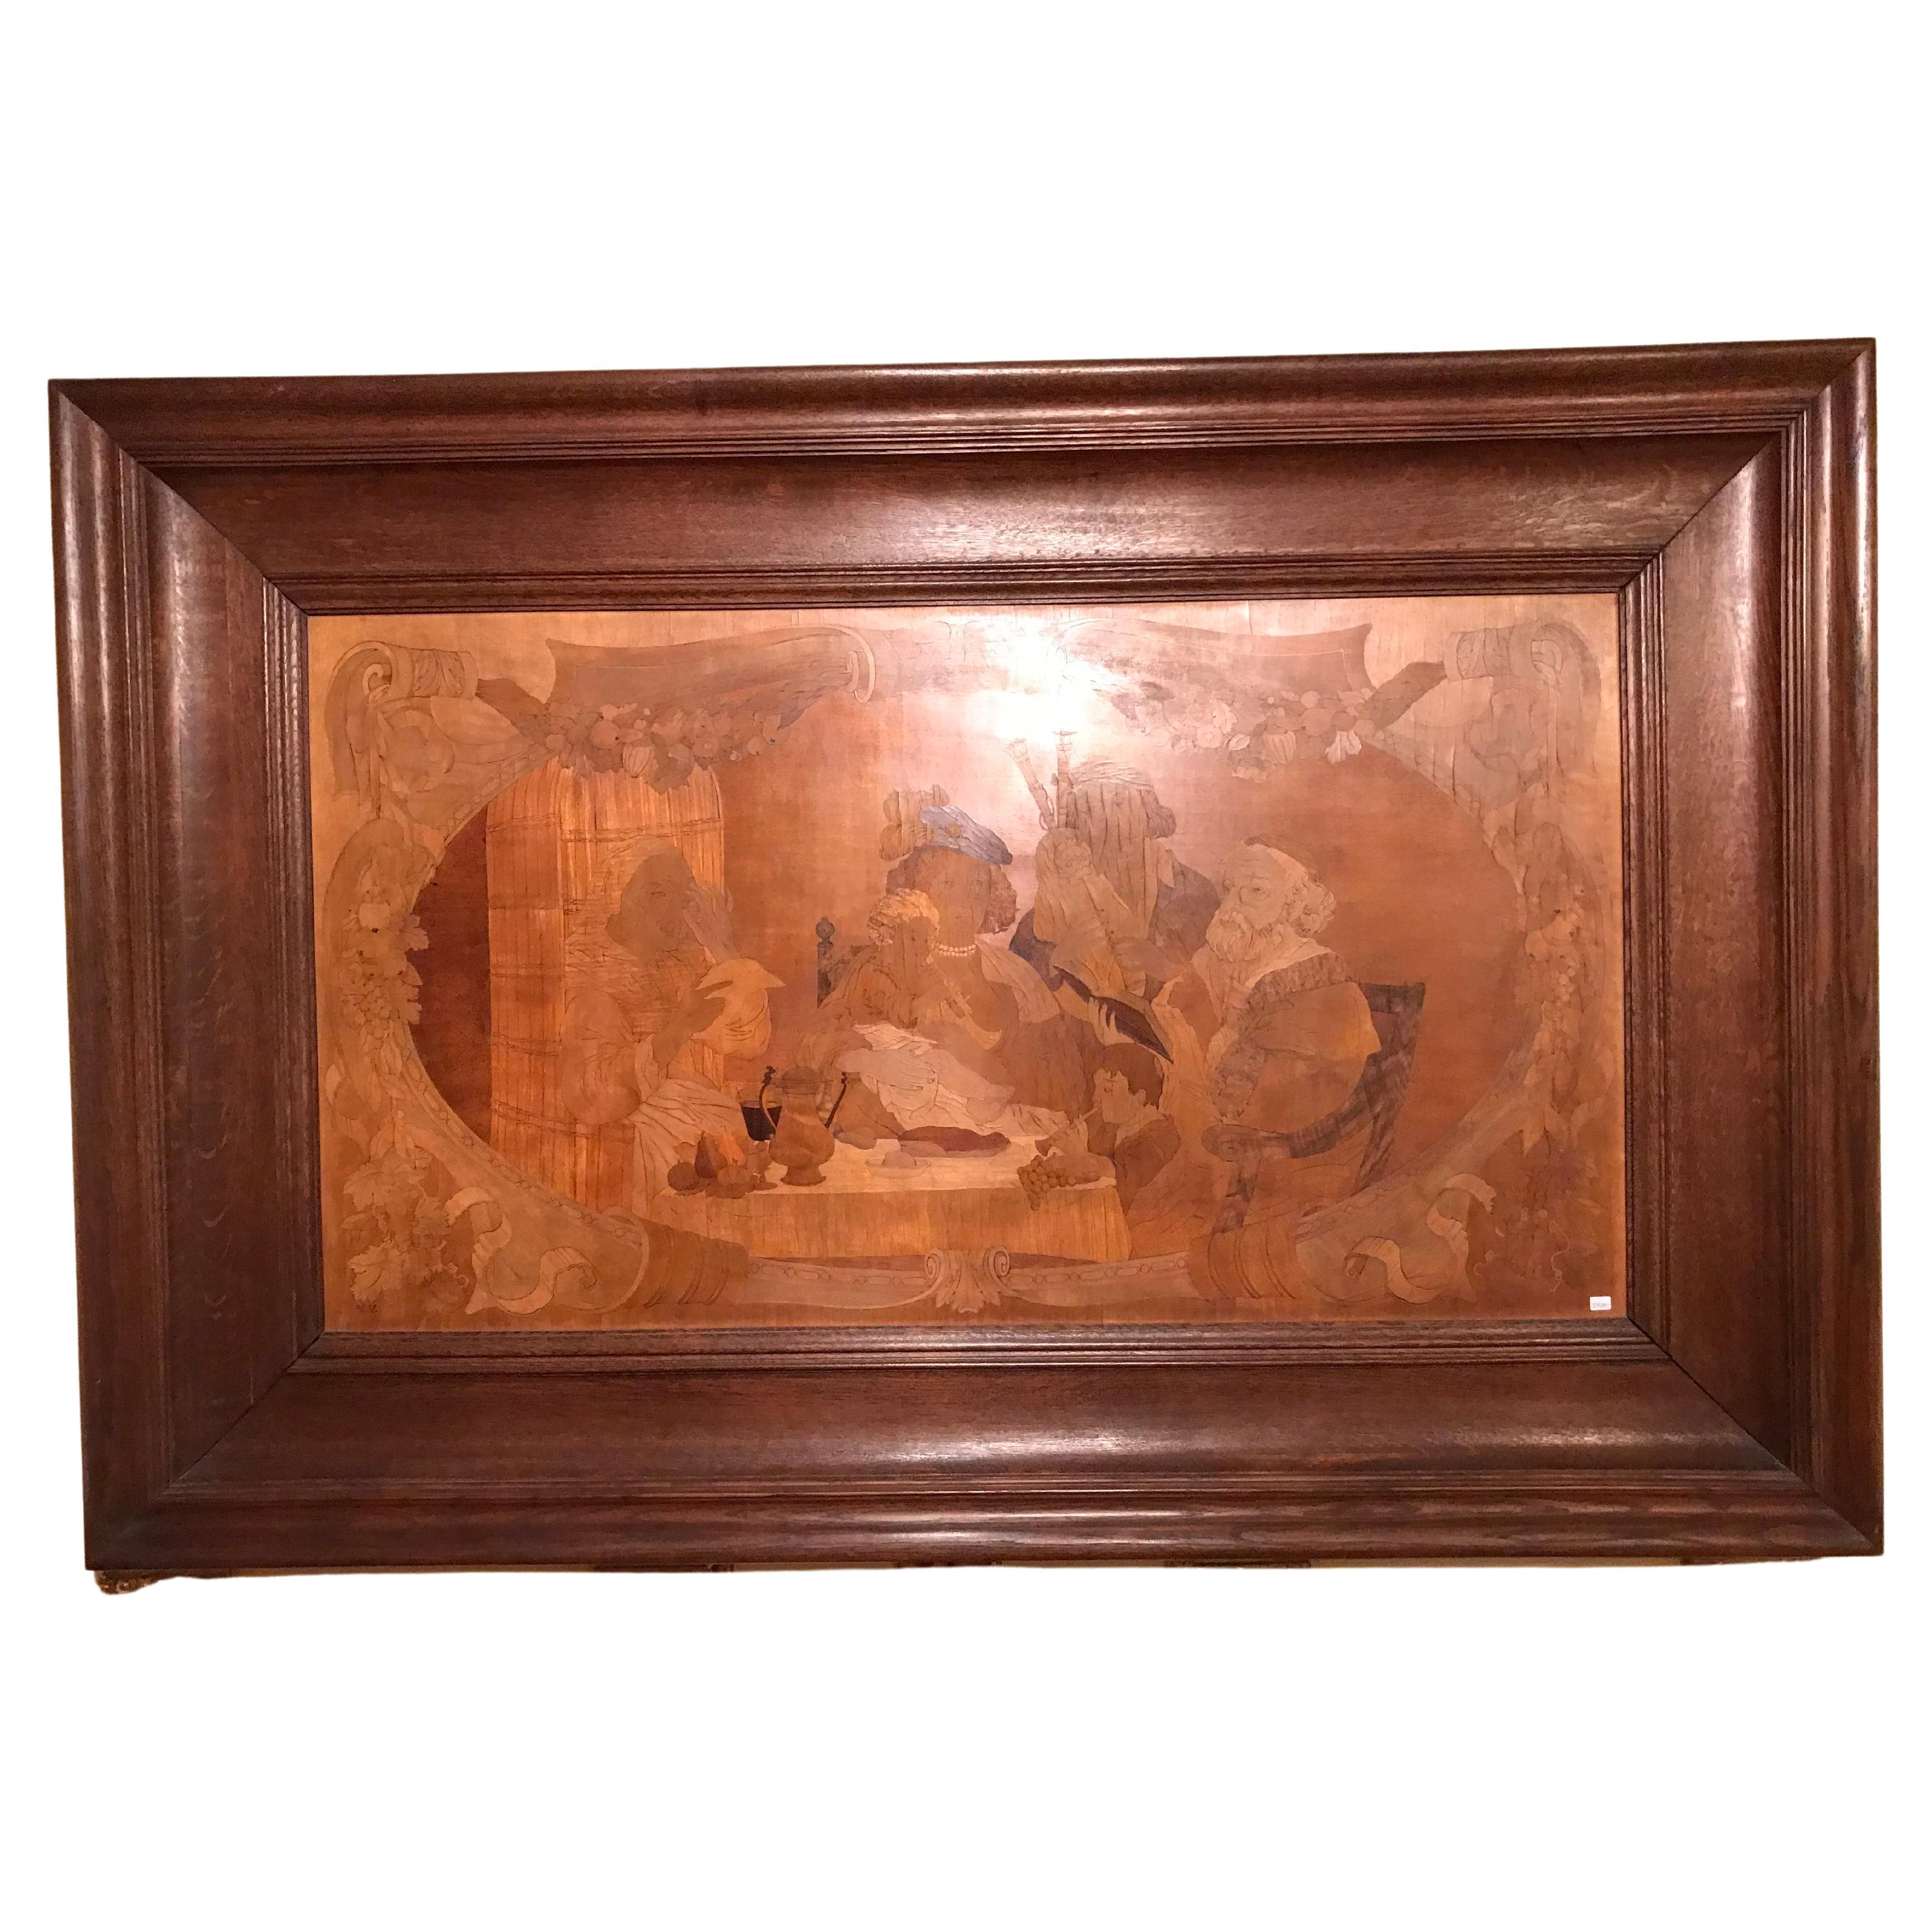 Monumental Old Wood Inlaid Mural, Signed W. V. Naive Art For Sale